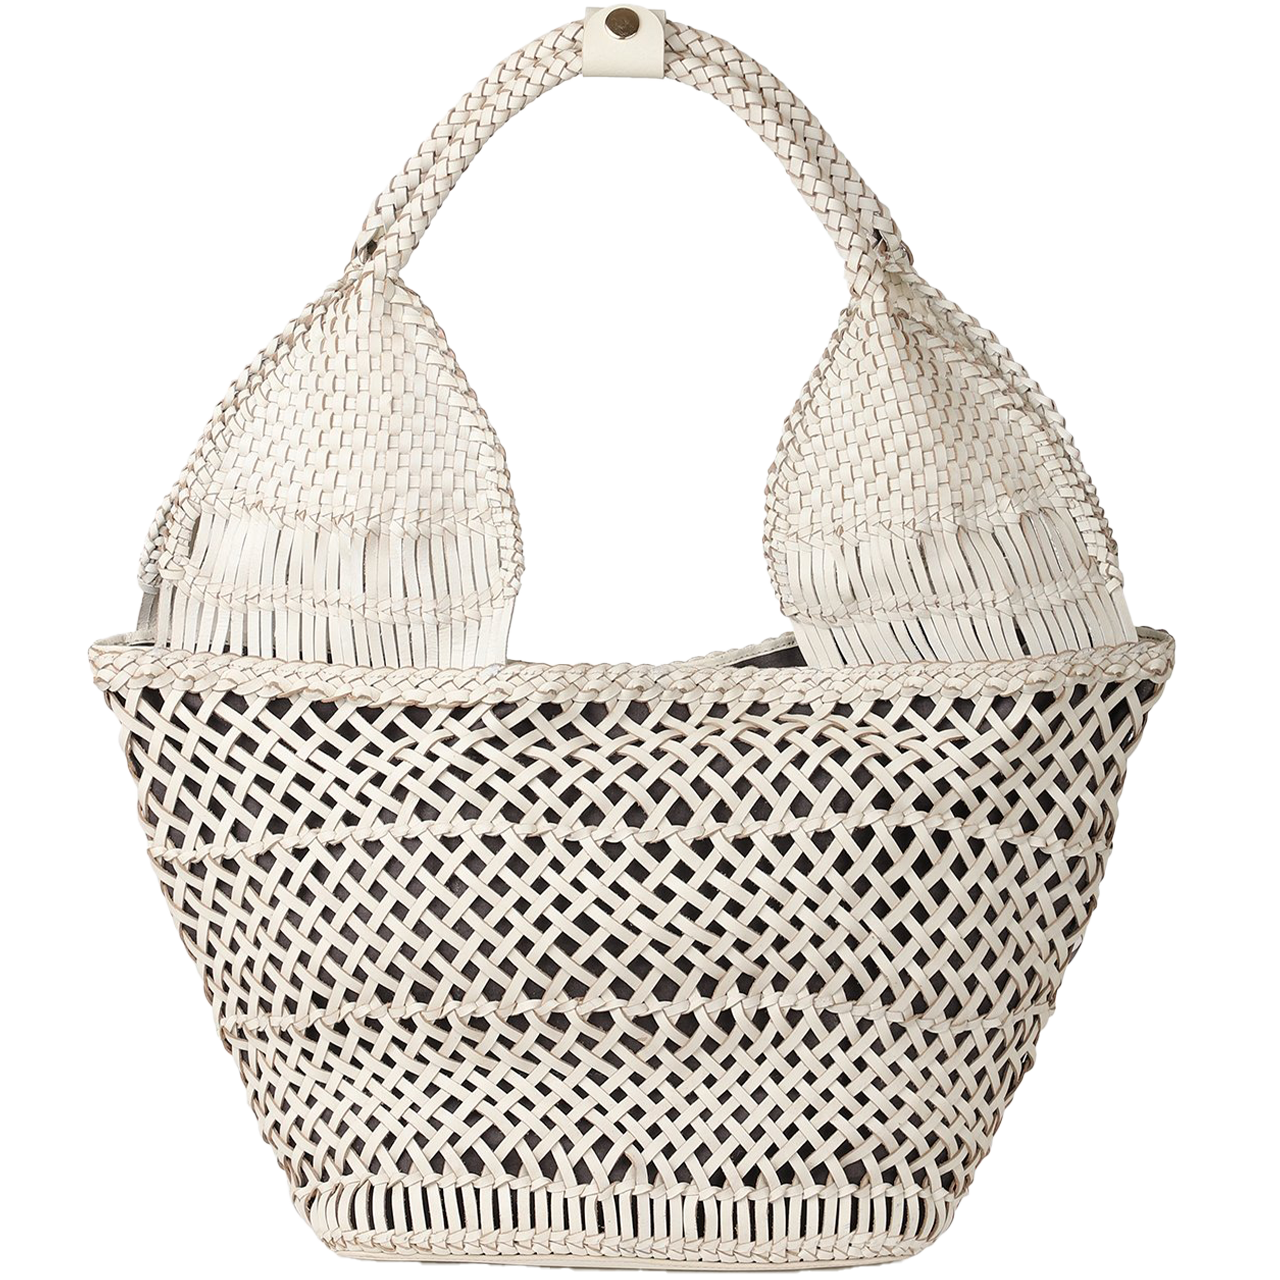 11 Woven and Straw Bags You Can Take From The Beach to The City